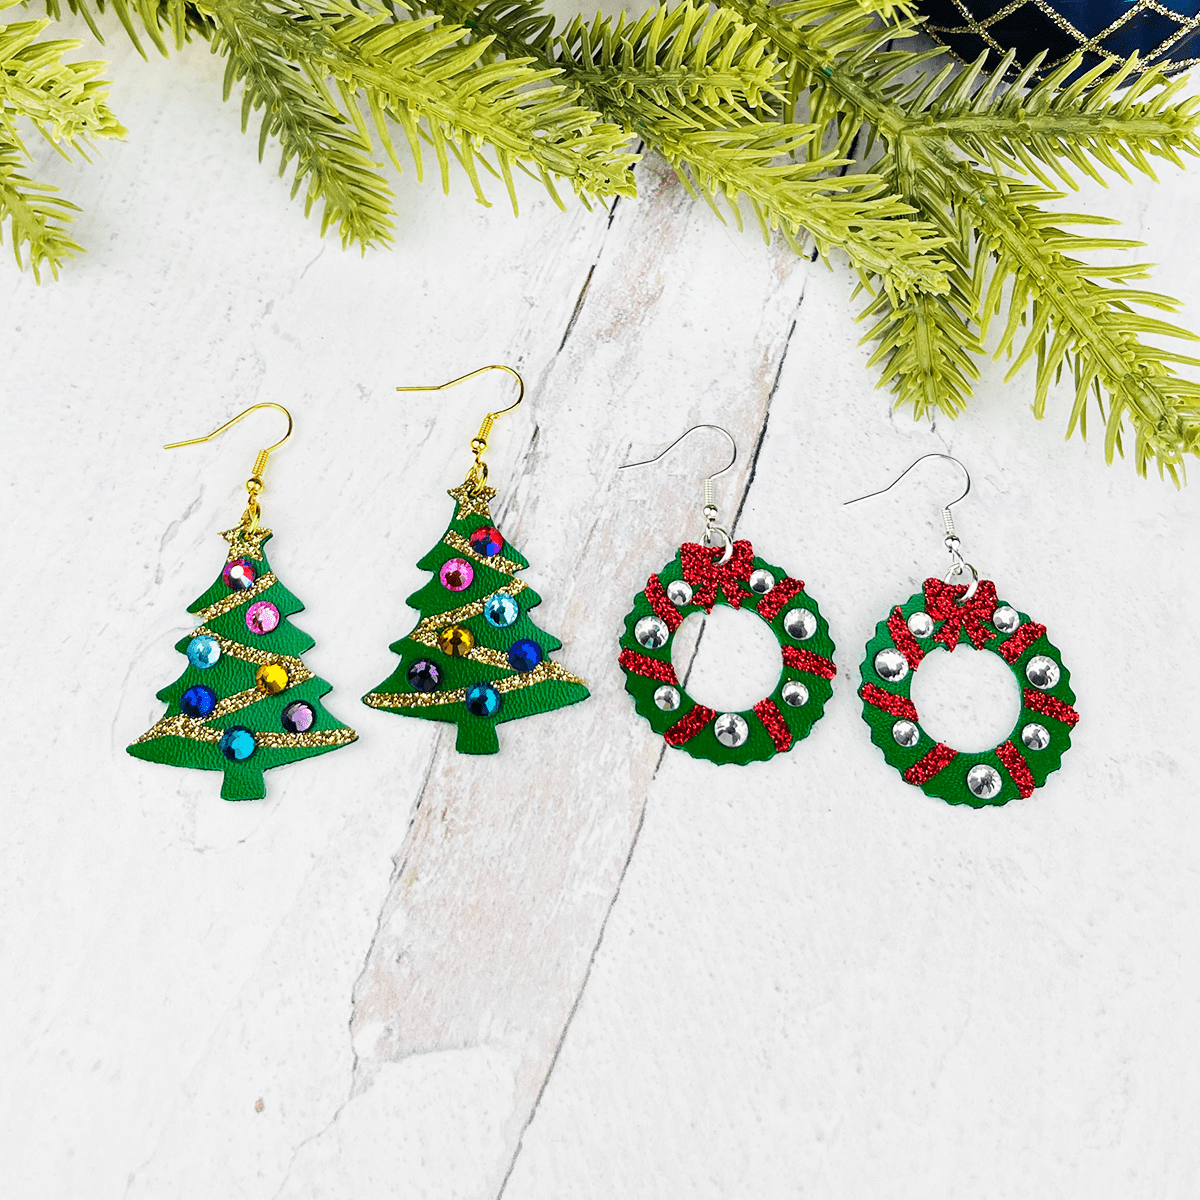 How to Make Christmas Tree Earrings and Holiday Wreath Earrings with a Cricut